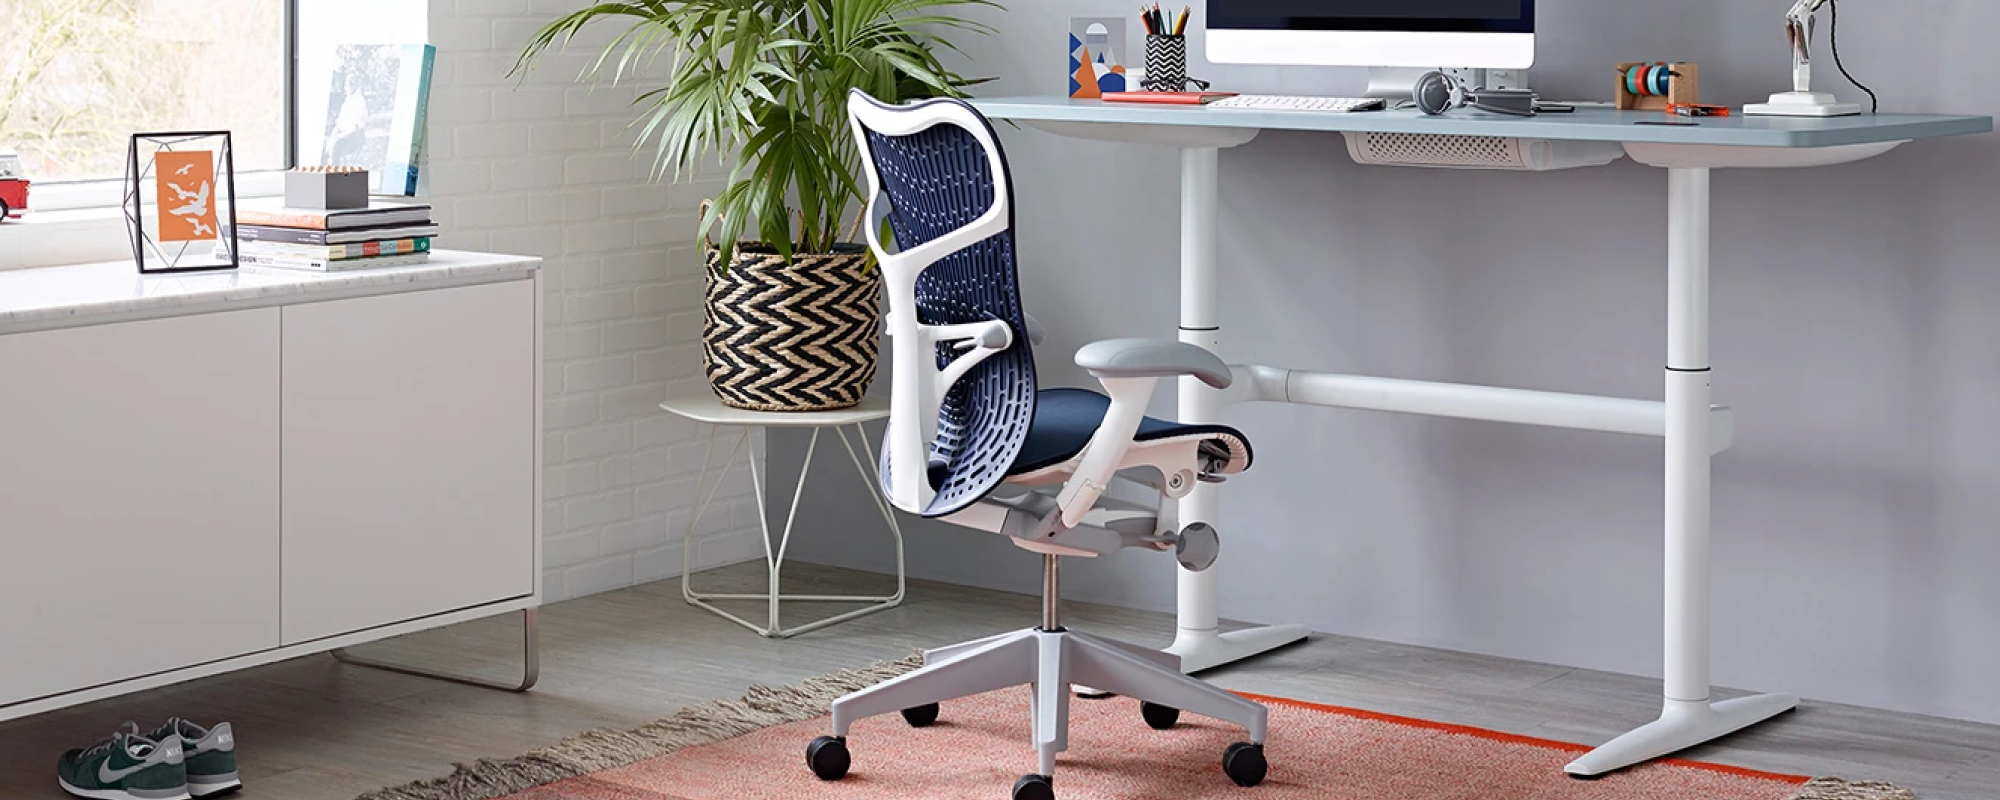 A light home office environment featuring a Twilight Butterfly Back Mirra 2 chair with polished base at a Atlas sit stand desk with a white polygon table in the corner.